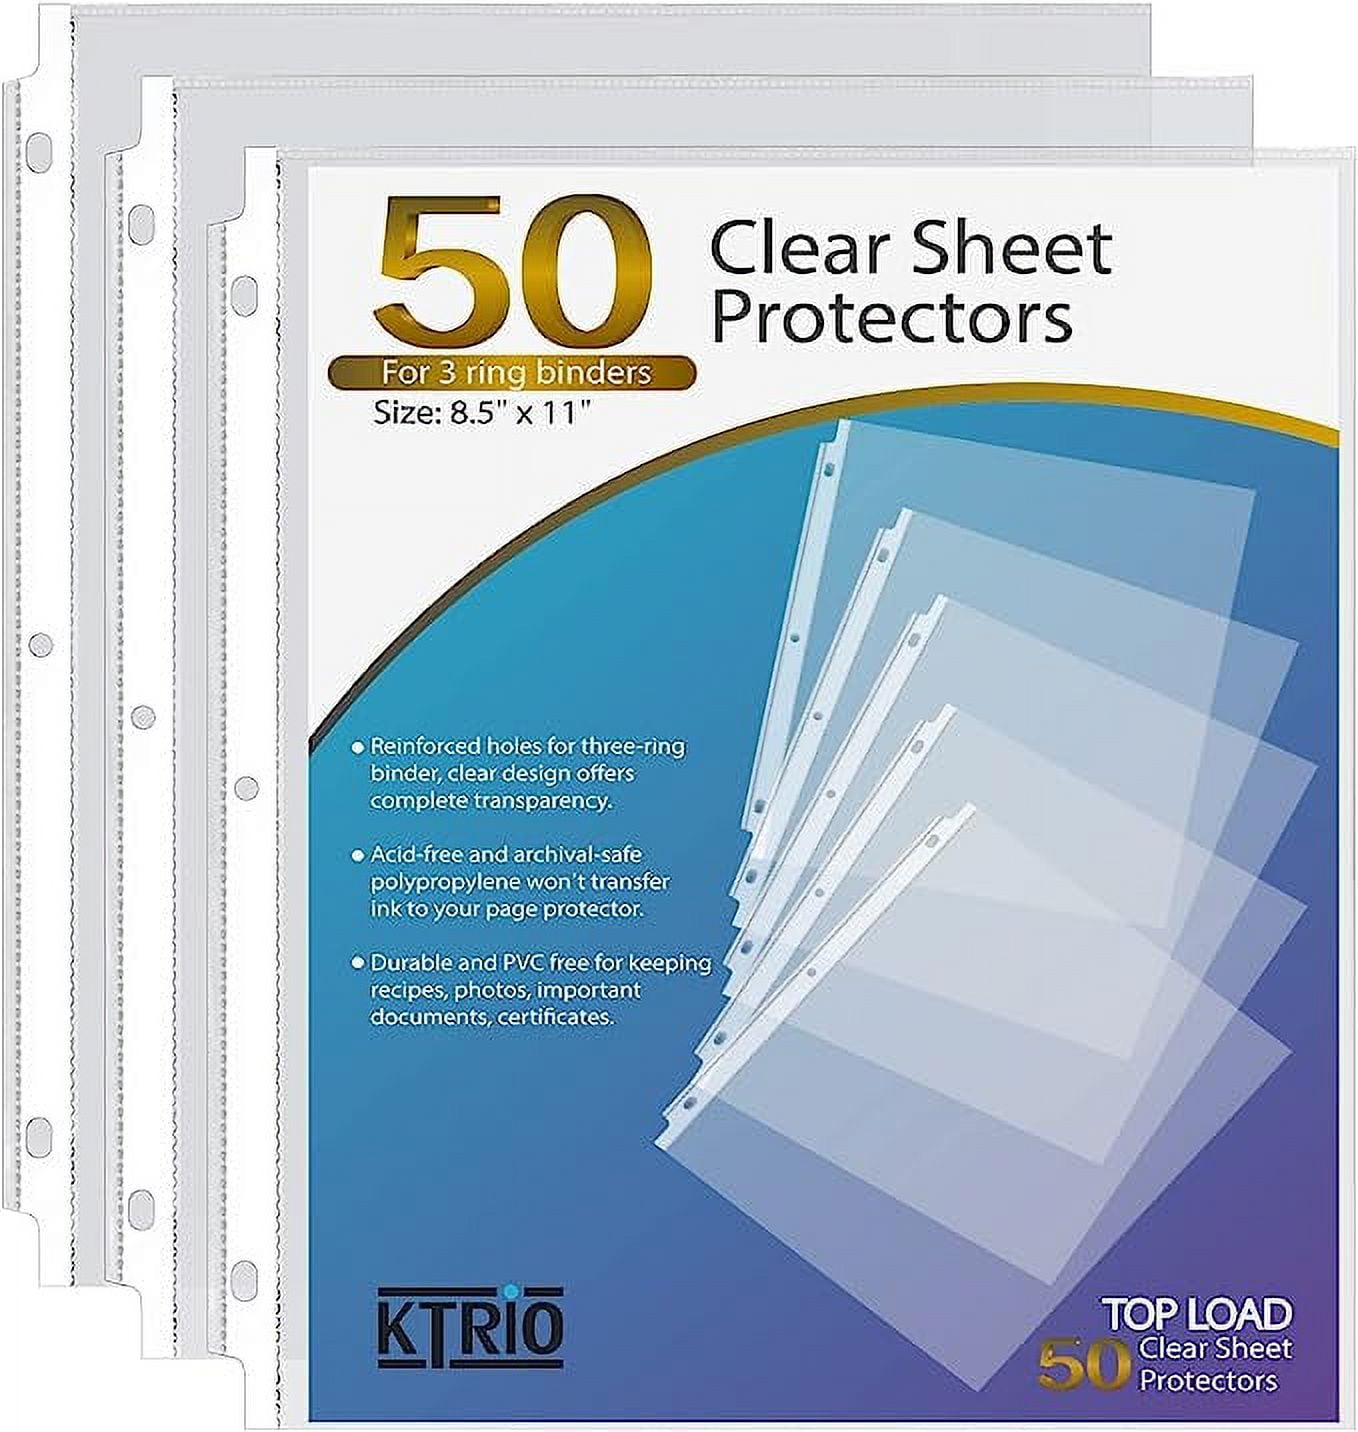 1InTheOffice Sheet Protectors for 3 Ring Binder 8.5 x 11, Clear Sheet  Protectors, Top Load Sheet Protectors, Letter Size- 50/Box